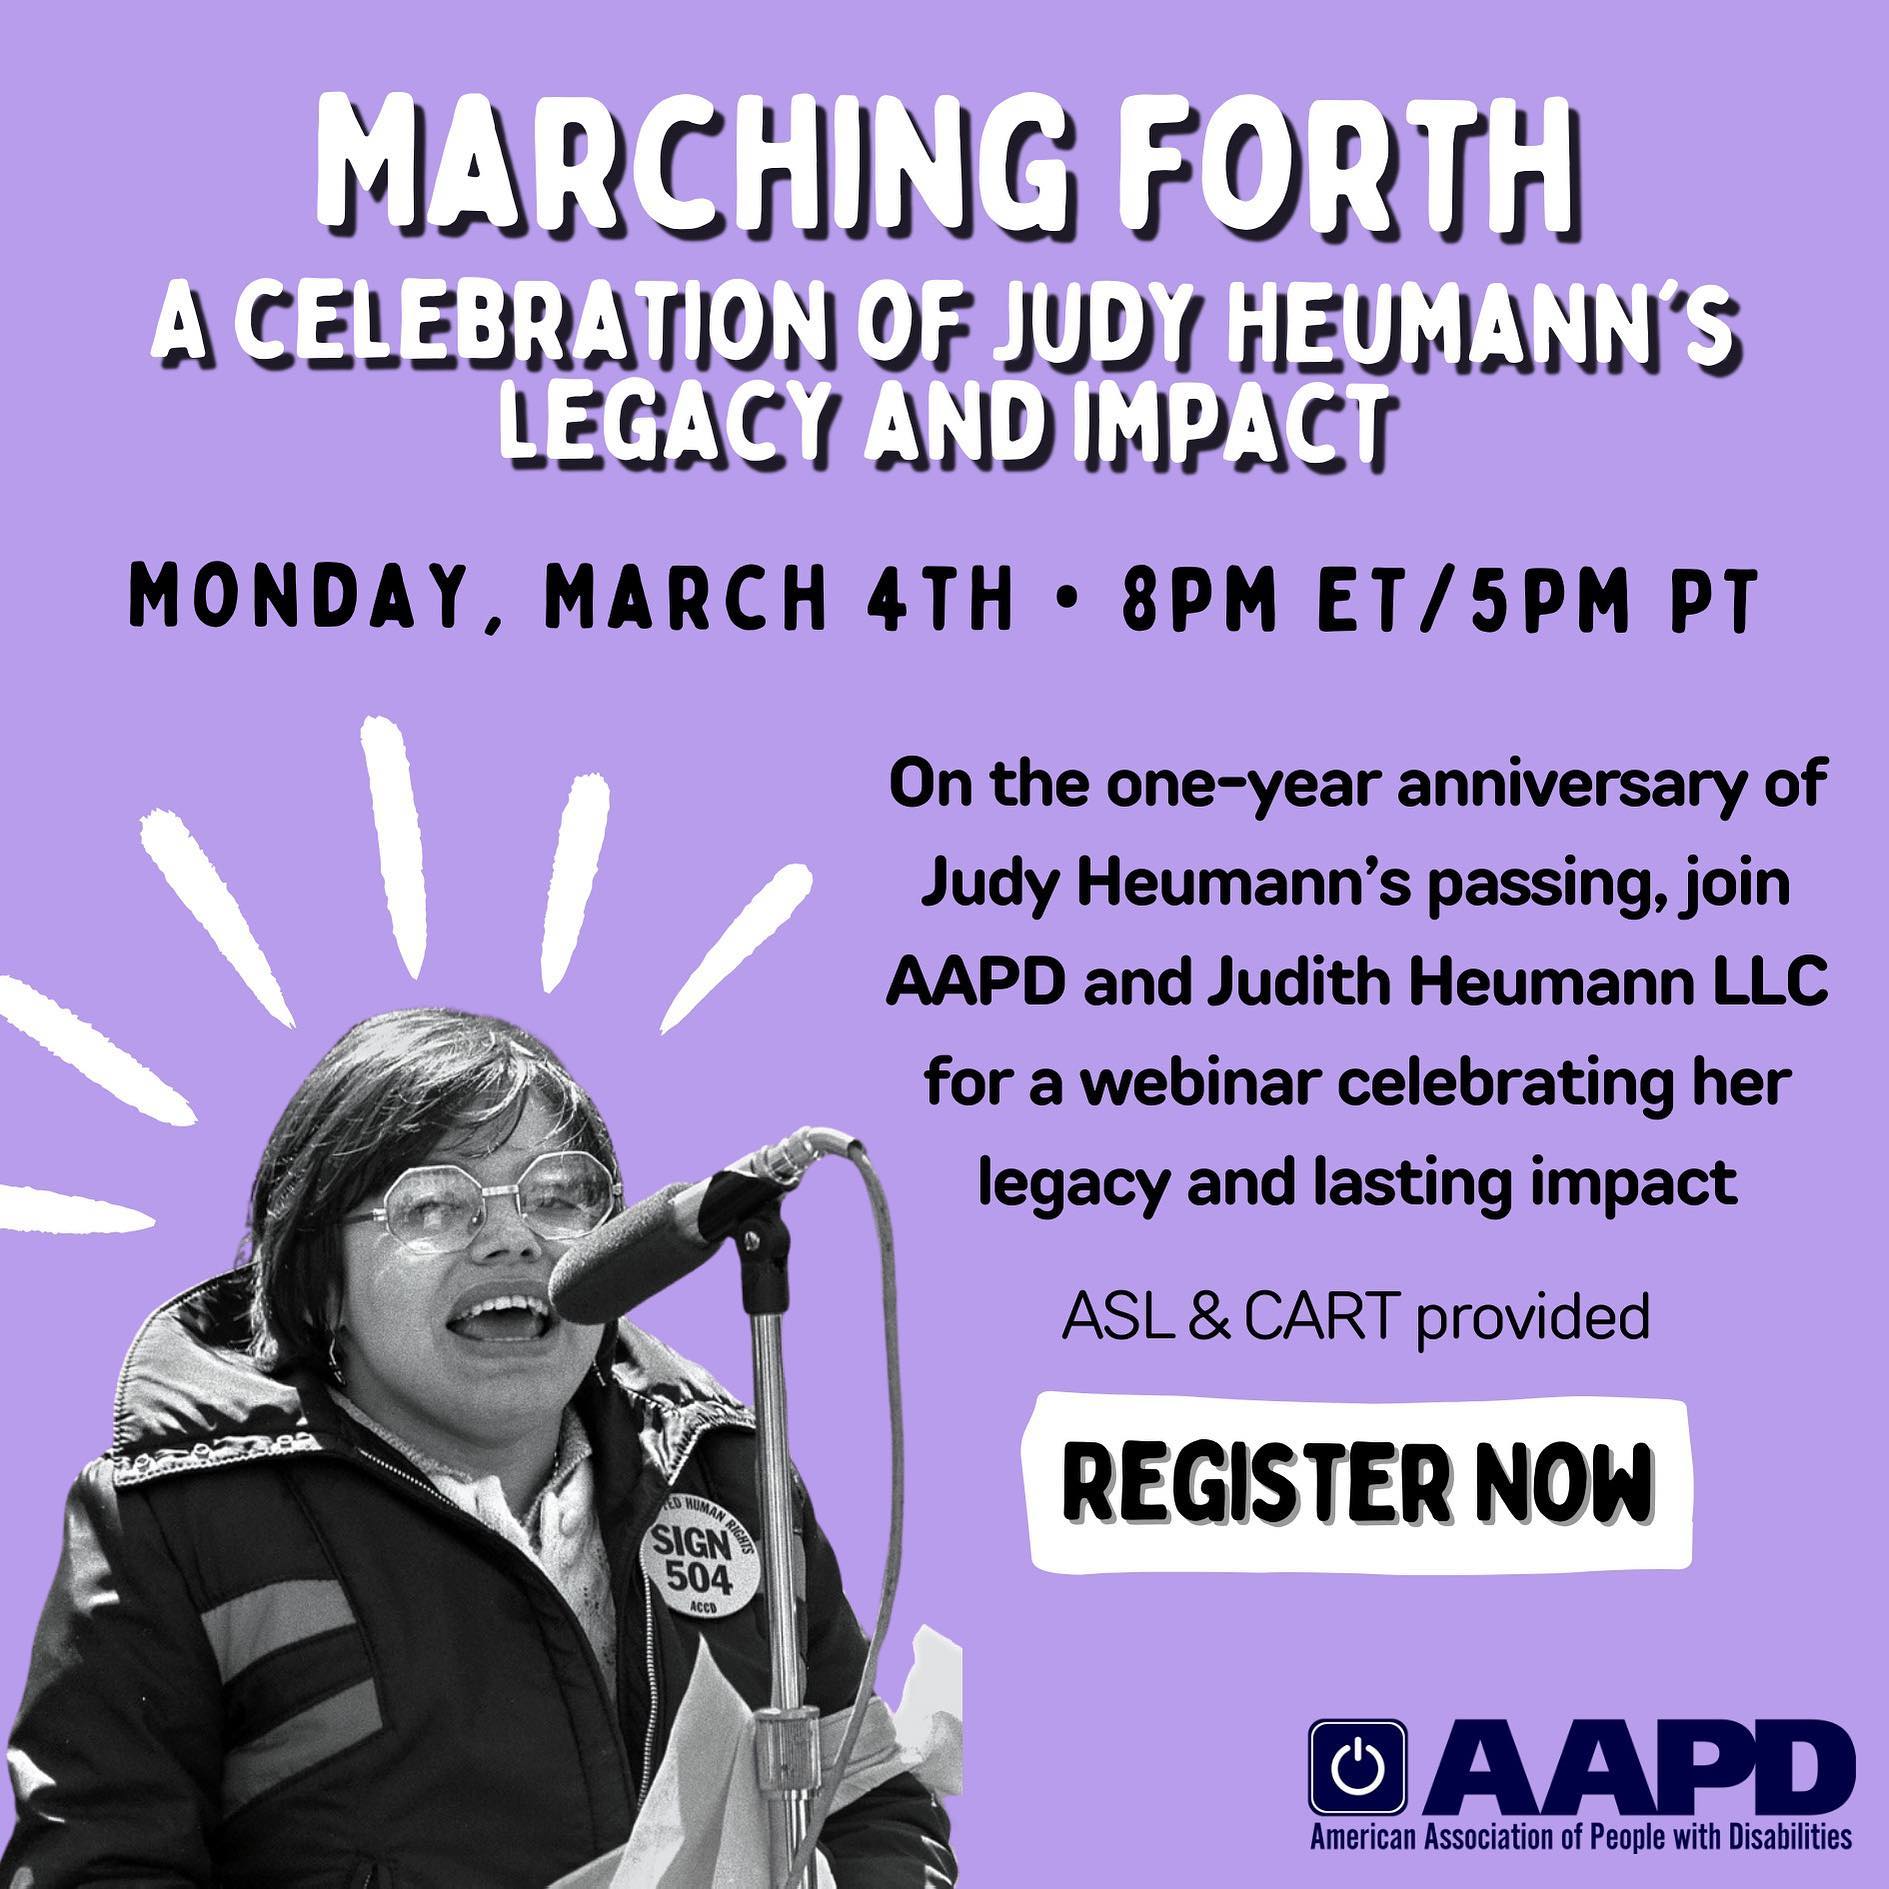 Image Description: A purple graphic with black and white text that reads “Marching Forth: A celebration of Judy Heumann’s legacy and impact. Monday, March 4th • 8pm ET / 5pm PT. On the one-year anniversary of Judy Heumann’s passing, join AAPD and Judith Heumann LLC for a webinar celebrating her legacy and lasting impact. ASL & CART provided. Register now.” Below is AAPD’s logo. In the left corner is a black and white photo of Judy Heumann speaking into a microphone at the 504 demonstrations with white lines above emphasizing the photo.